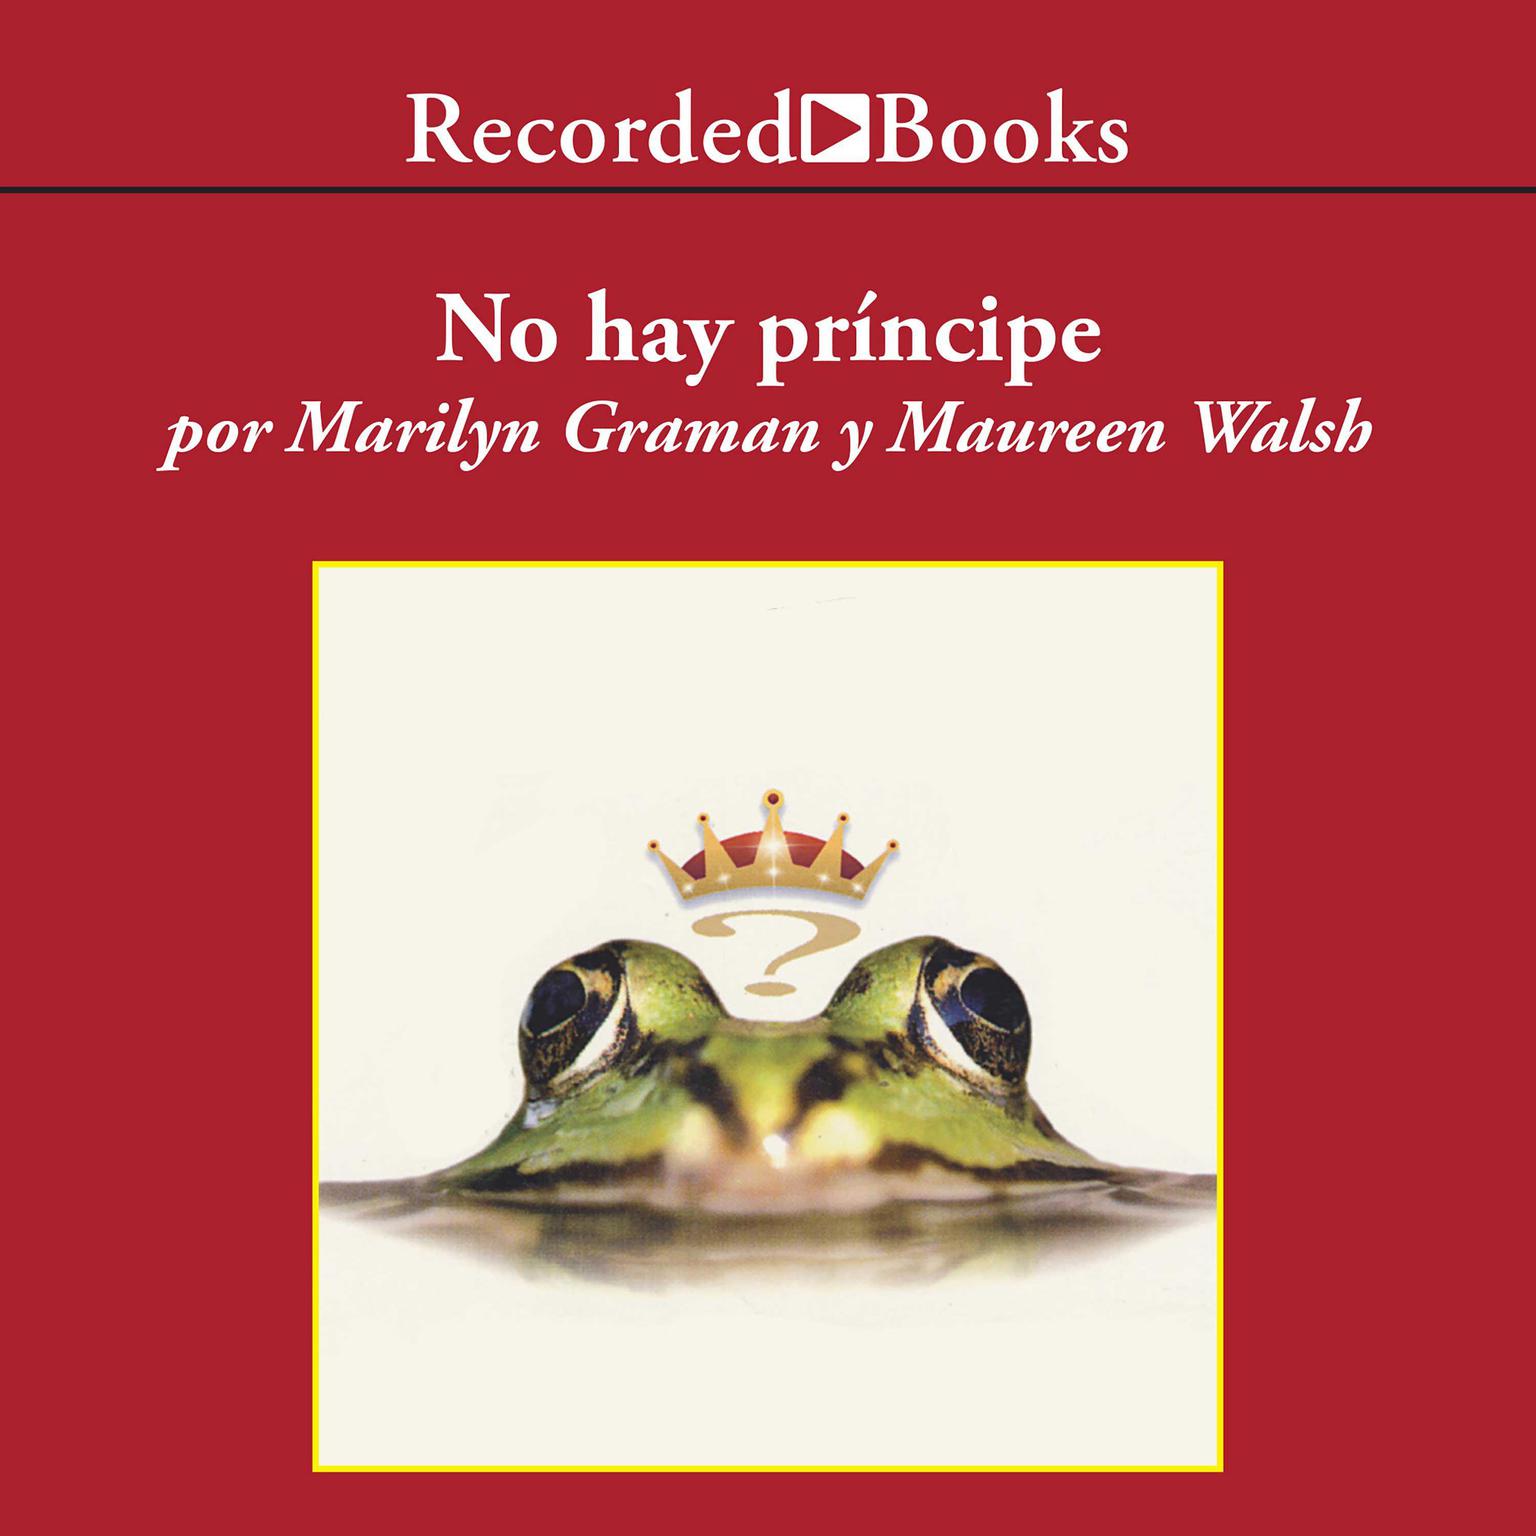 No hay principe y otras verdades que tu madre nunca te conto (There is No Prince and Other Truths Your Mother Never Told You) Audiobook, by Marilyn Graman